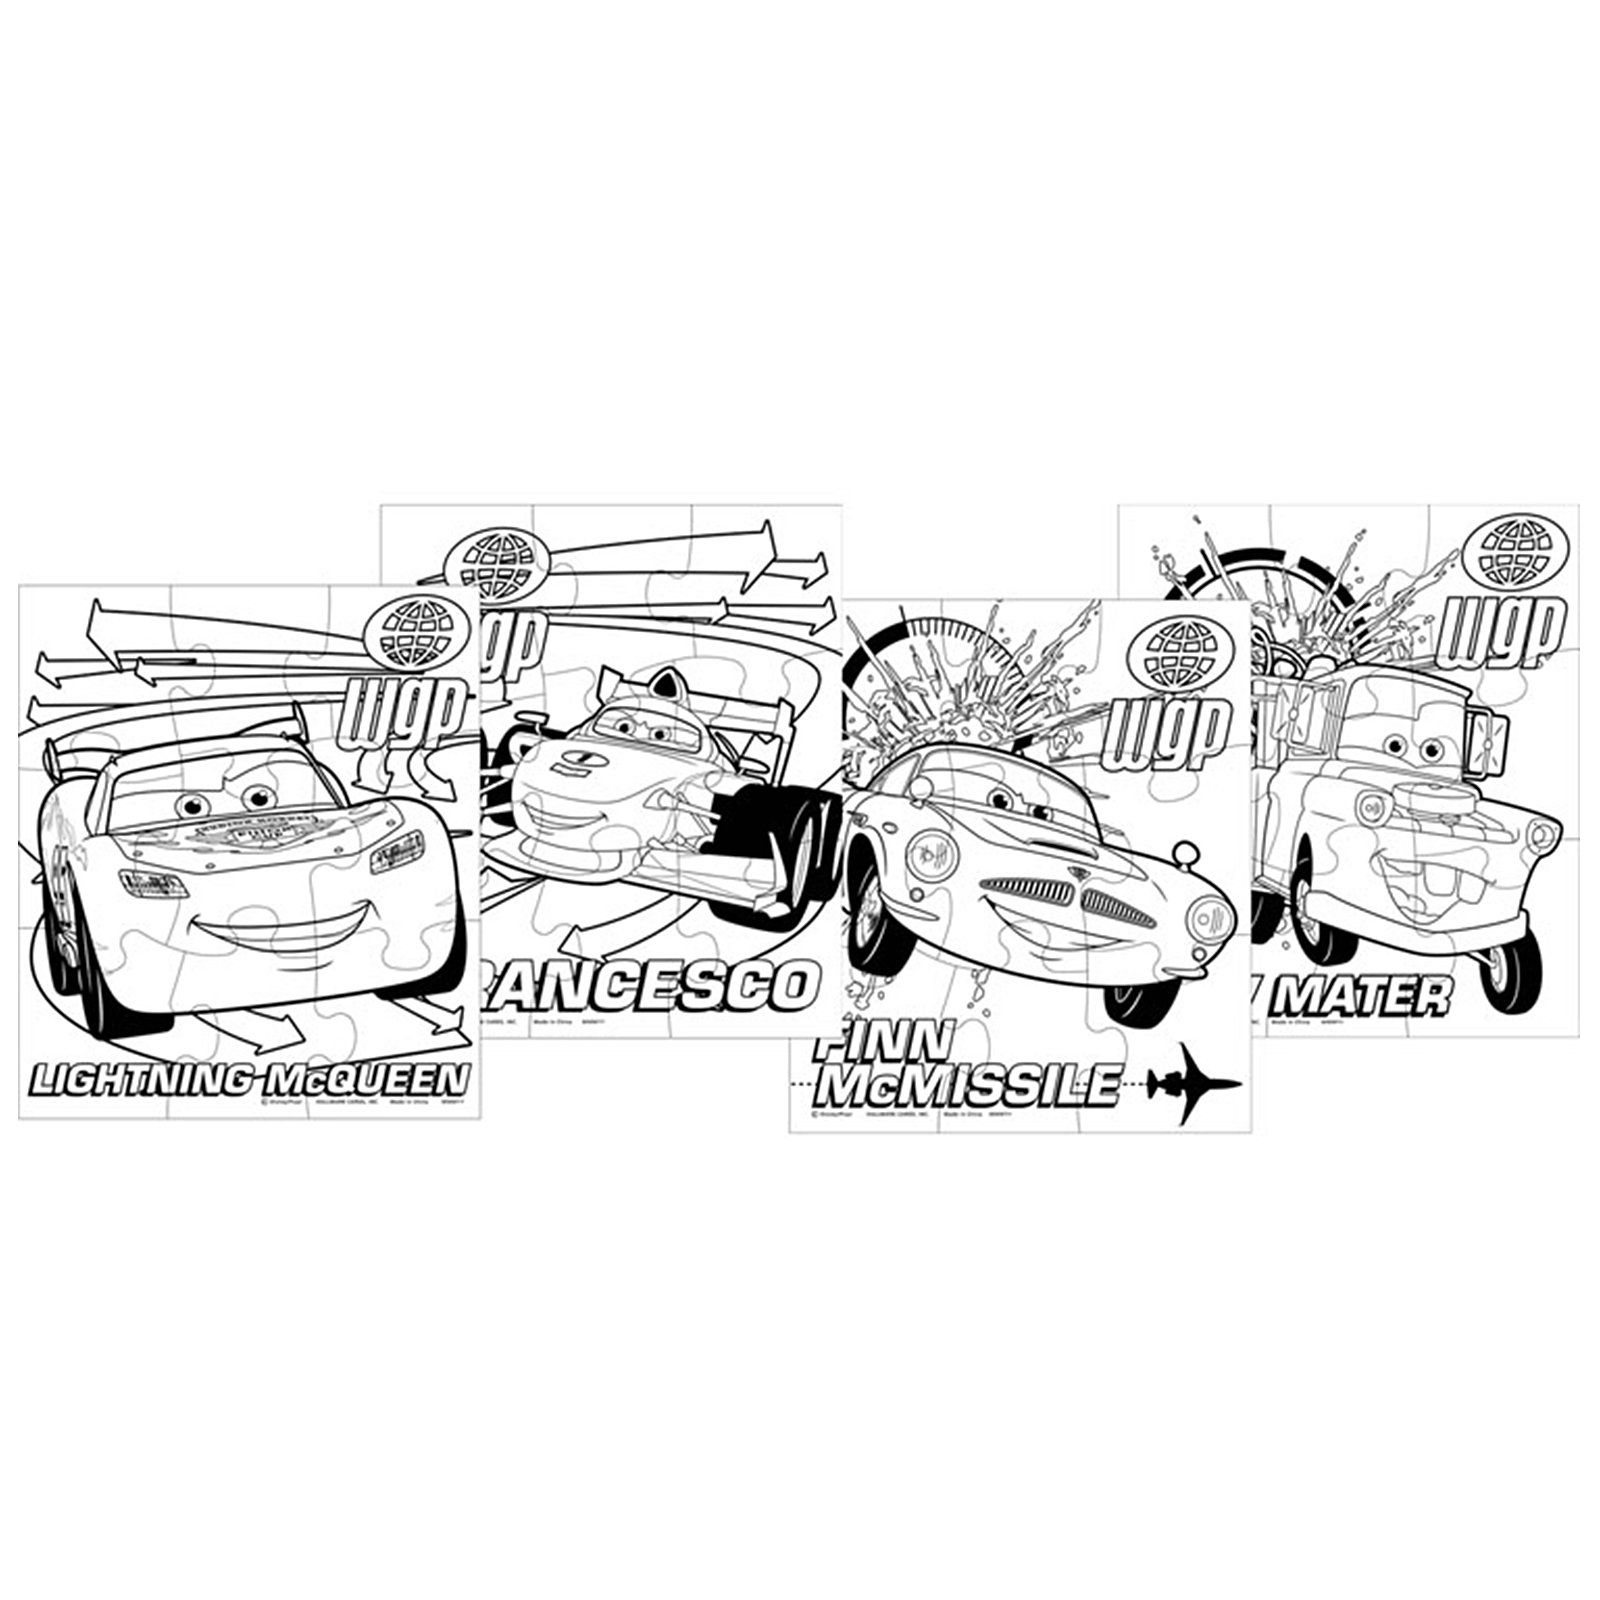 Coloring Pages Disney Cars 2 - Coloring